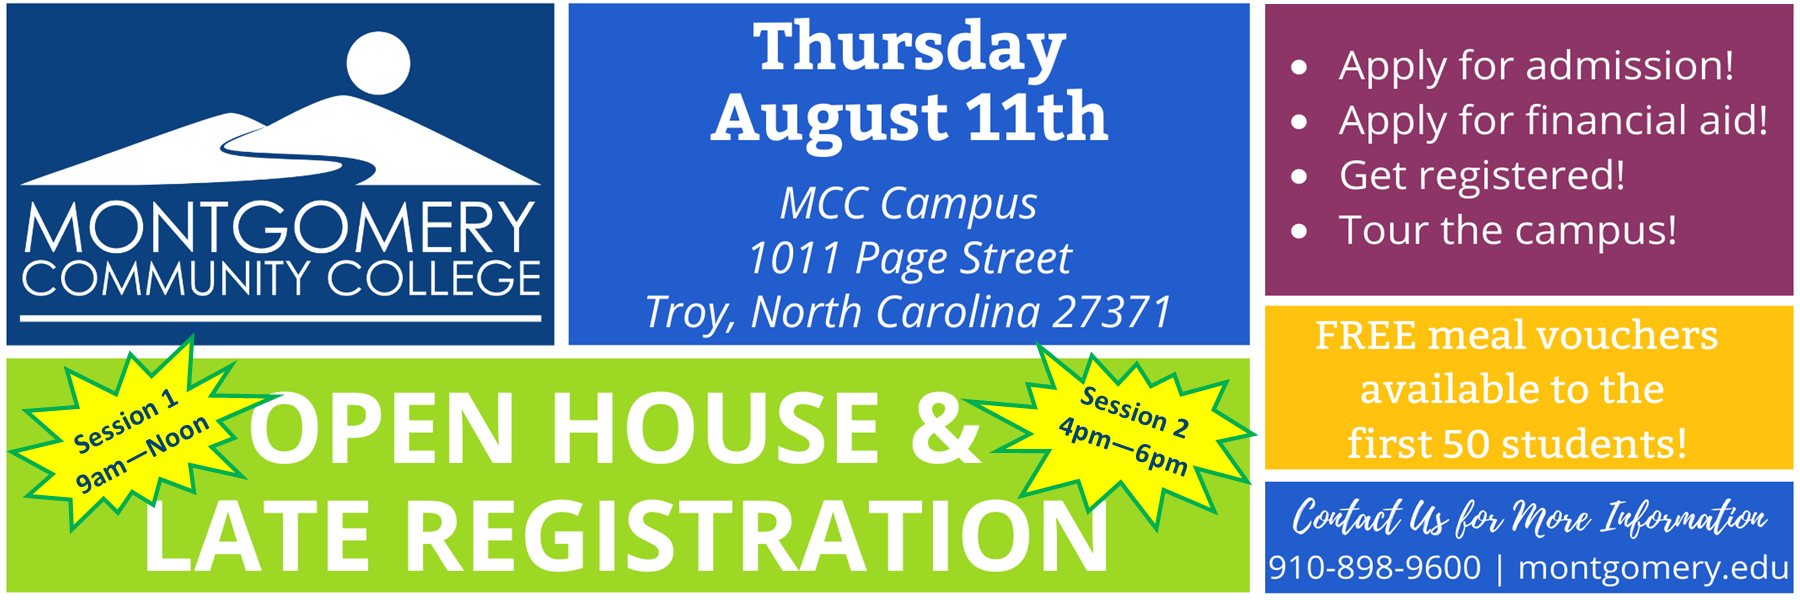 Thursday August 11th MCC Campus 1011 Page Street Troy, North Carolina 27371 Open house and registration. Session 1 9am-noon. Session 2 4pm-6pm. Apply for admission. Apply for financial aid! Get registered! Tour the campus! Free meal vouchers available to the first 50 students! Contact us for more information 910-898-9600 montgomery.edu